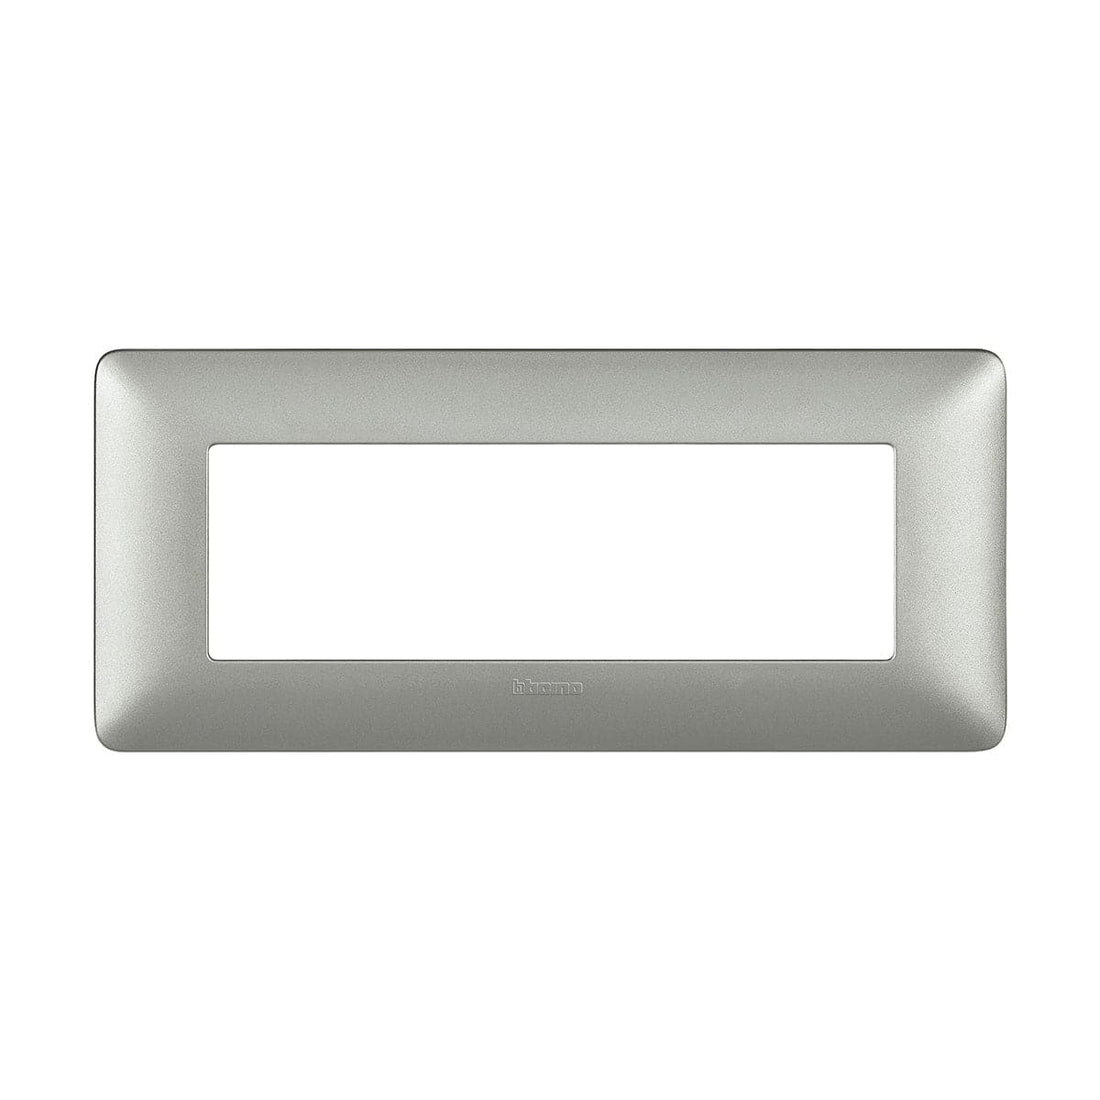 MATIX PLATE 6 PLACES SILVER - best price from Maltashopper.com BR420100847